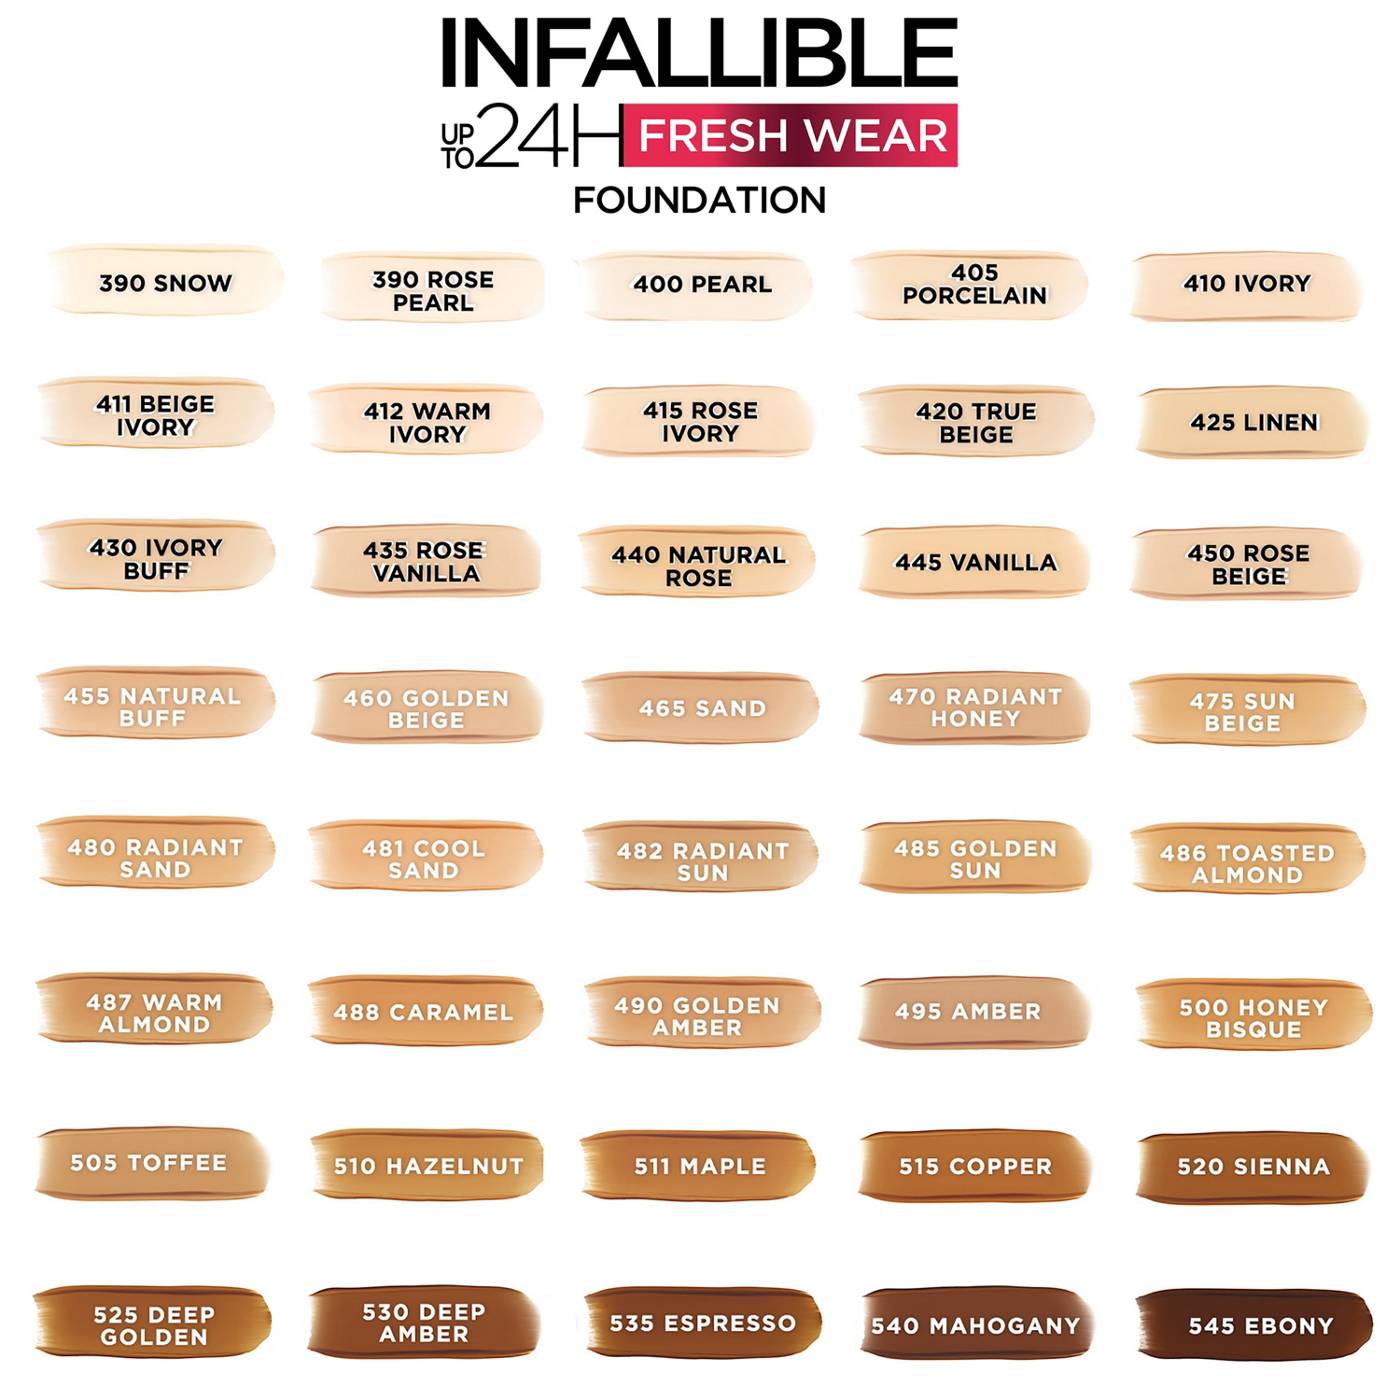 L'Oréal Paris Infallible Up to 24 Hour Fresh Wear Foundation - Lightweight Warm Almond; image 5 of 8